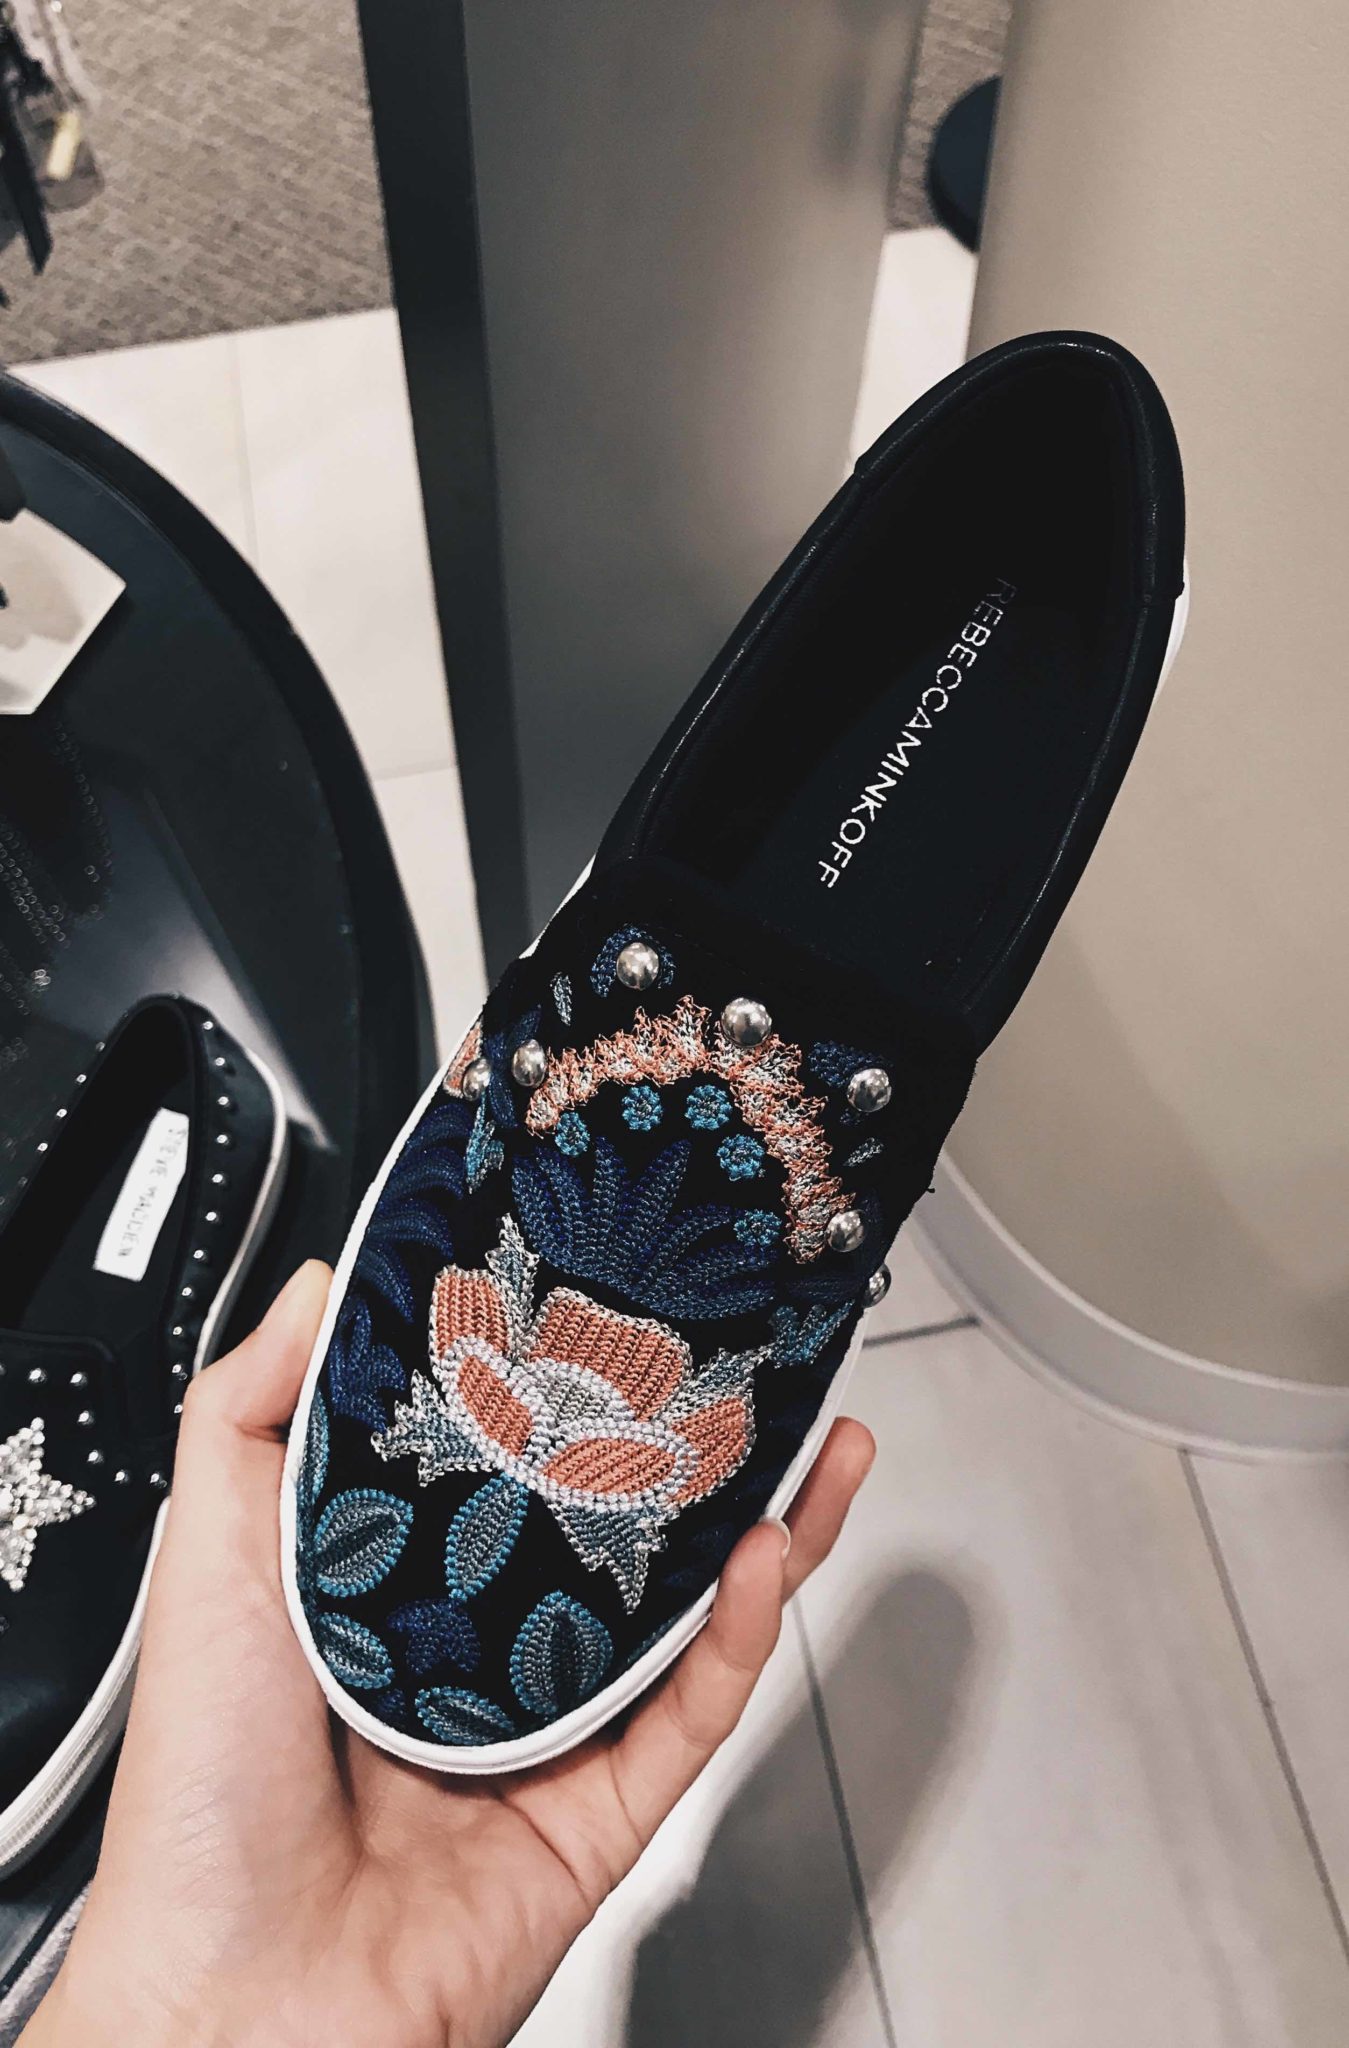 Austin Blogger DTKAustin has compiled a try-on guide of her top picks from the Nordstrom Anniversary Sale that are still in stock!